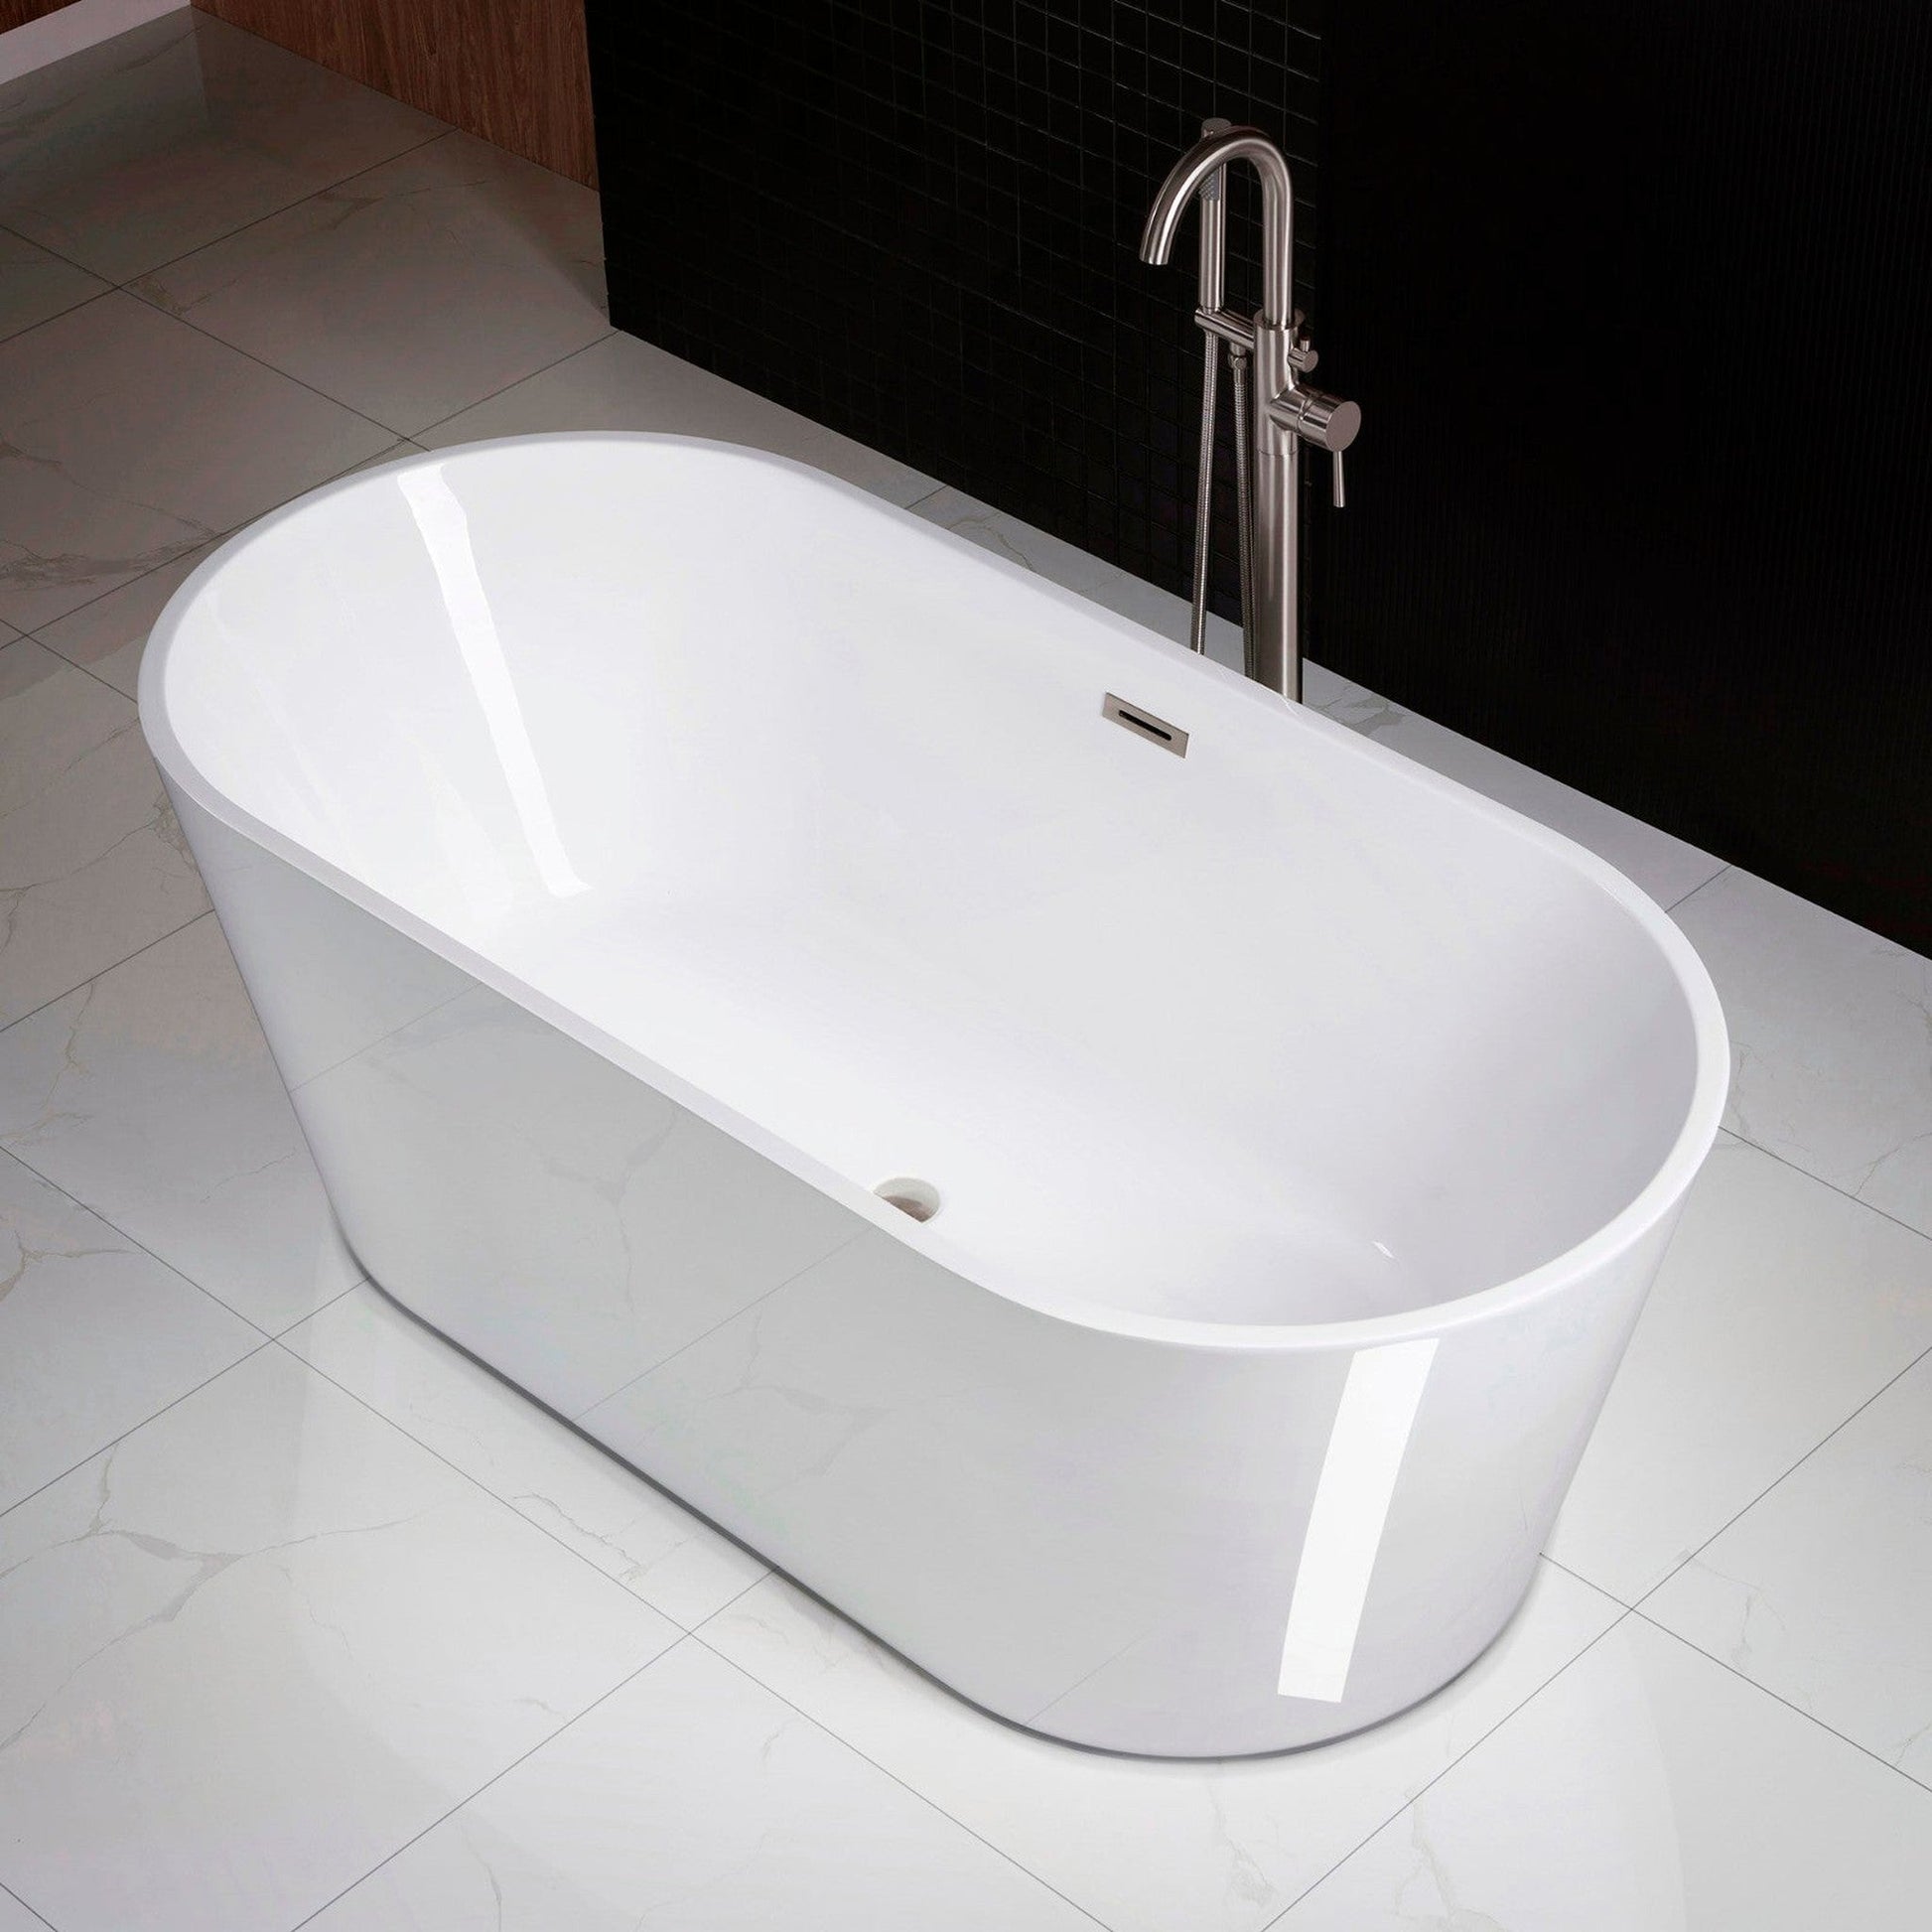 WoodBridge 71" White Acrylic Freestanding Contemporary Soaking Bathtub With Brushed Nickel Drain, Overflow, F0001BNRD Tub Filler and Caddy Tray